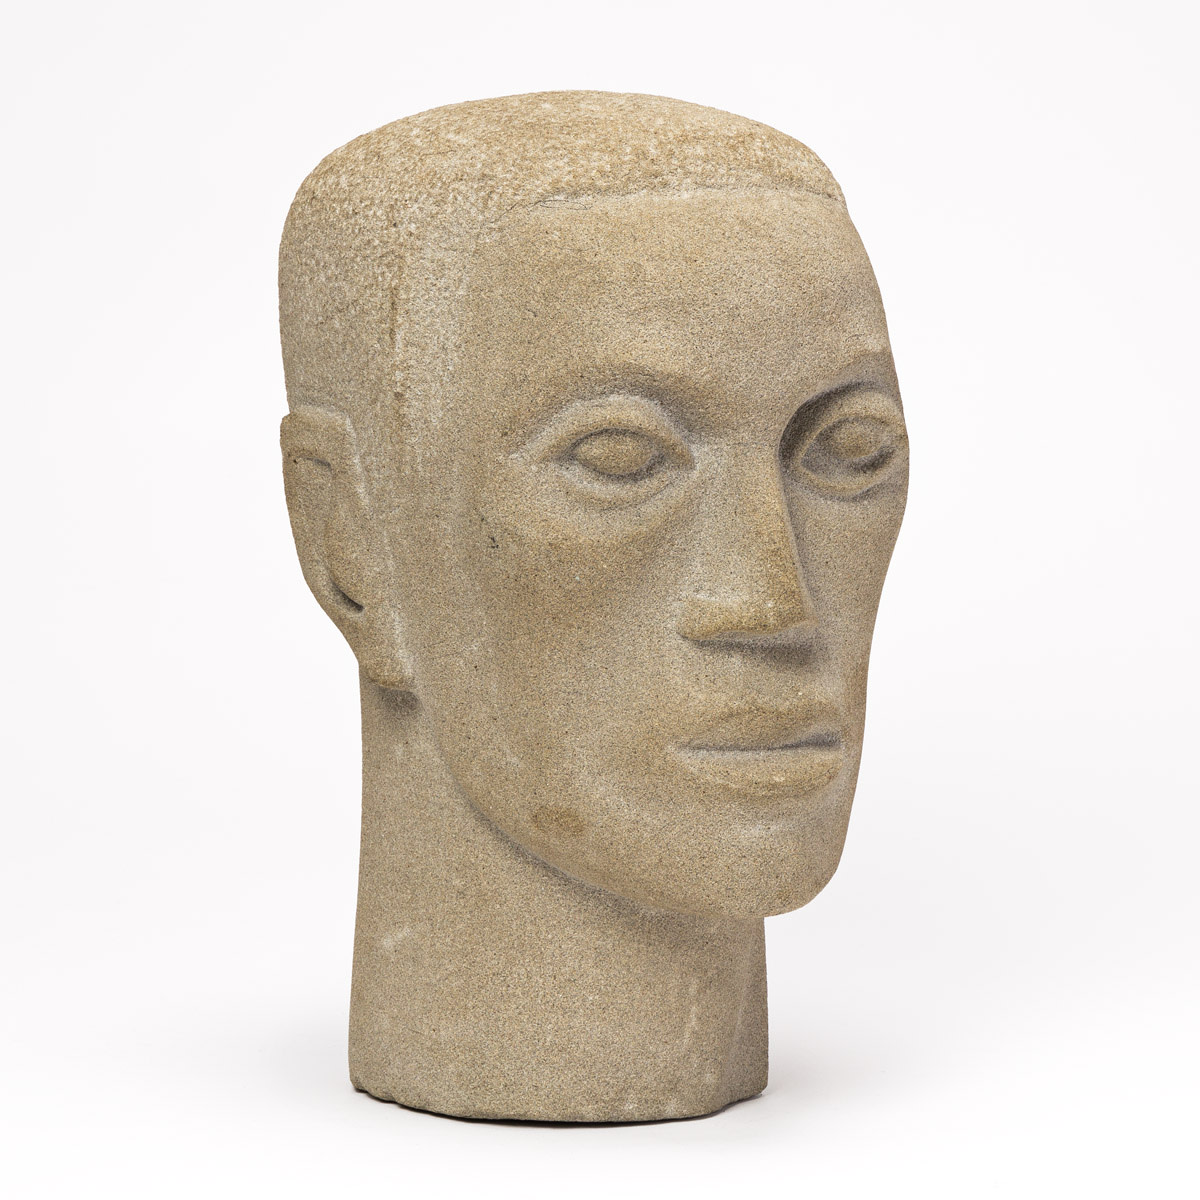 Elizabeth Catlett, “Head,” carved limestone, 1943; sold for $485,00, a record for Catlett.